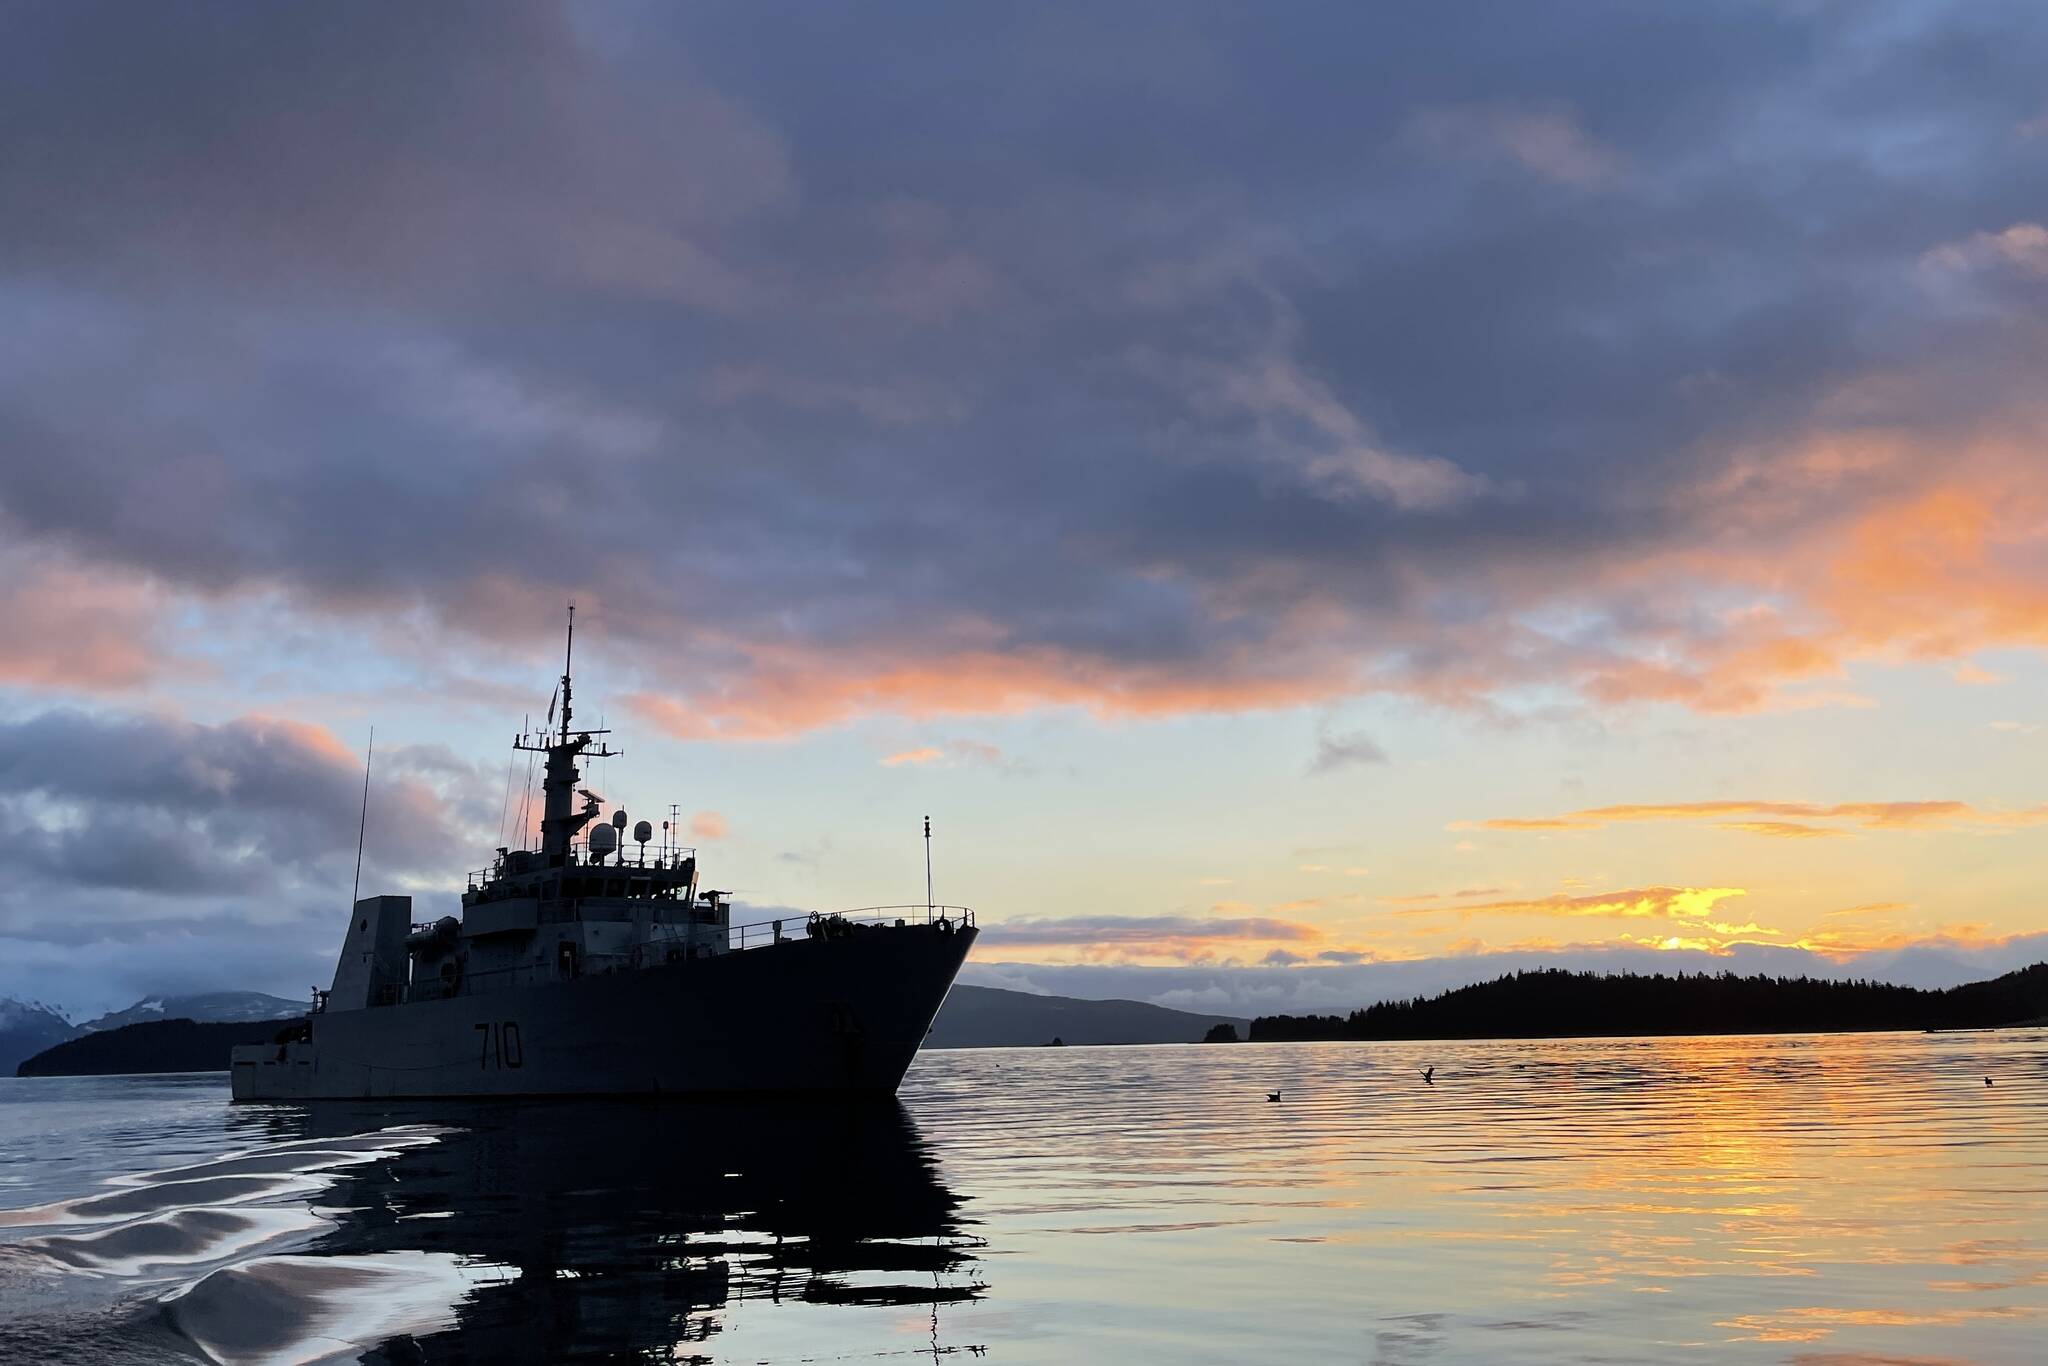 Her Majesty’s Canadian Ship Brandon sits off Auke Bay after offloading passengers on March 6, 2022 as part of exercise Arctic Edge 2022. (Michael S. Lockett / Juneau Empire)